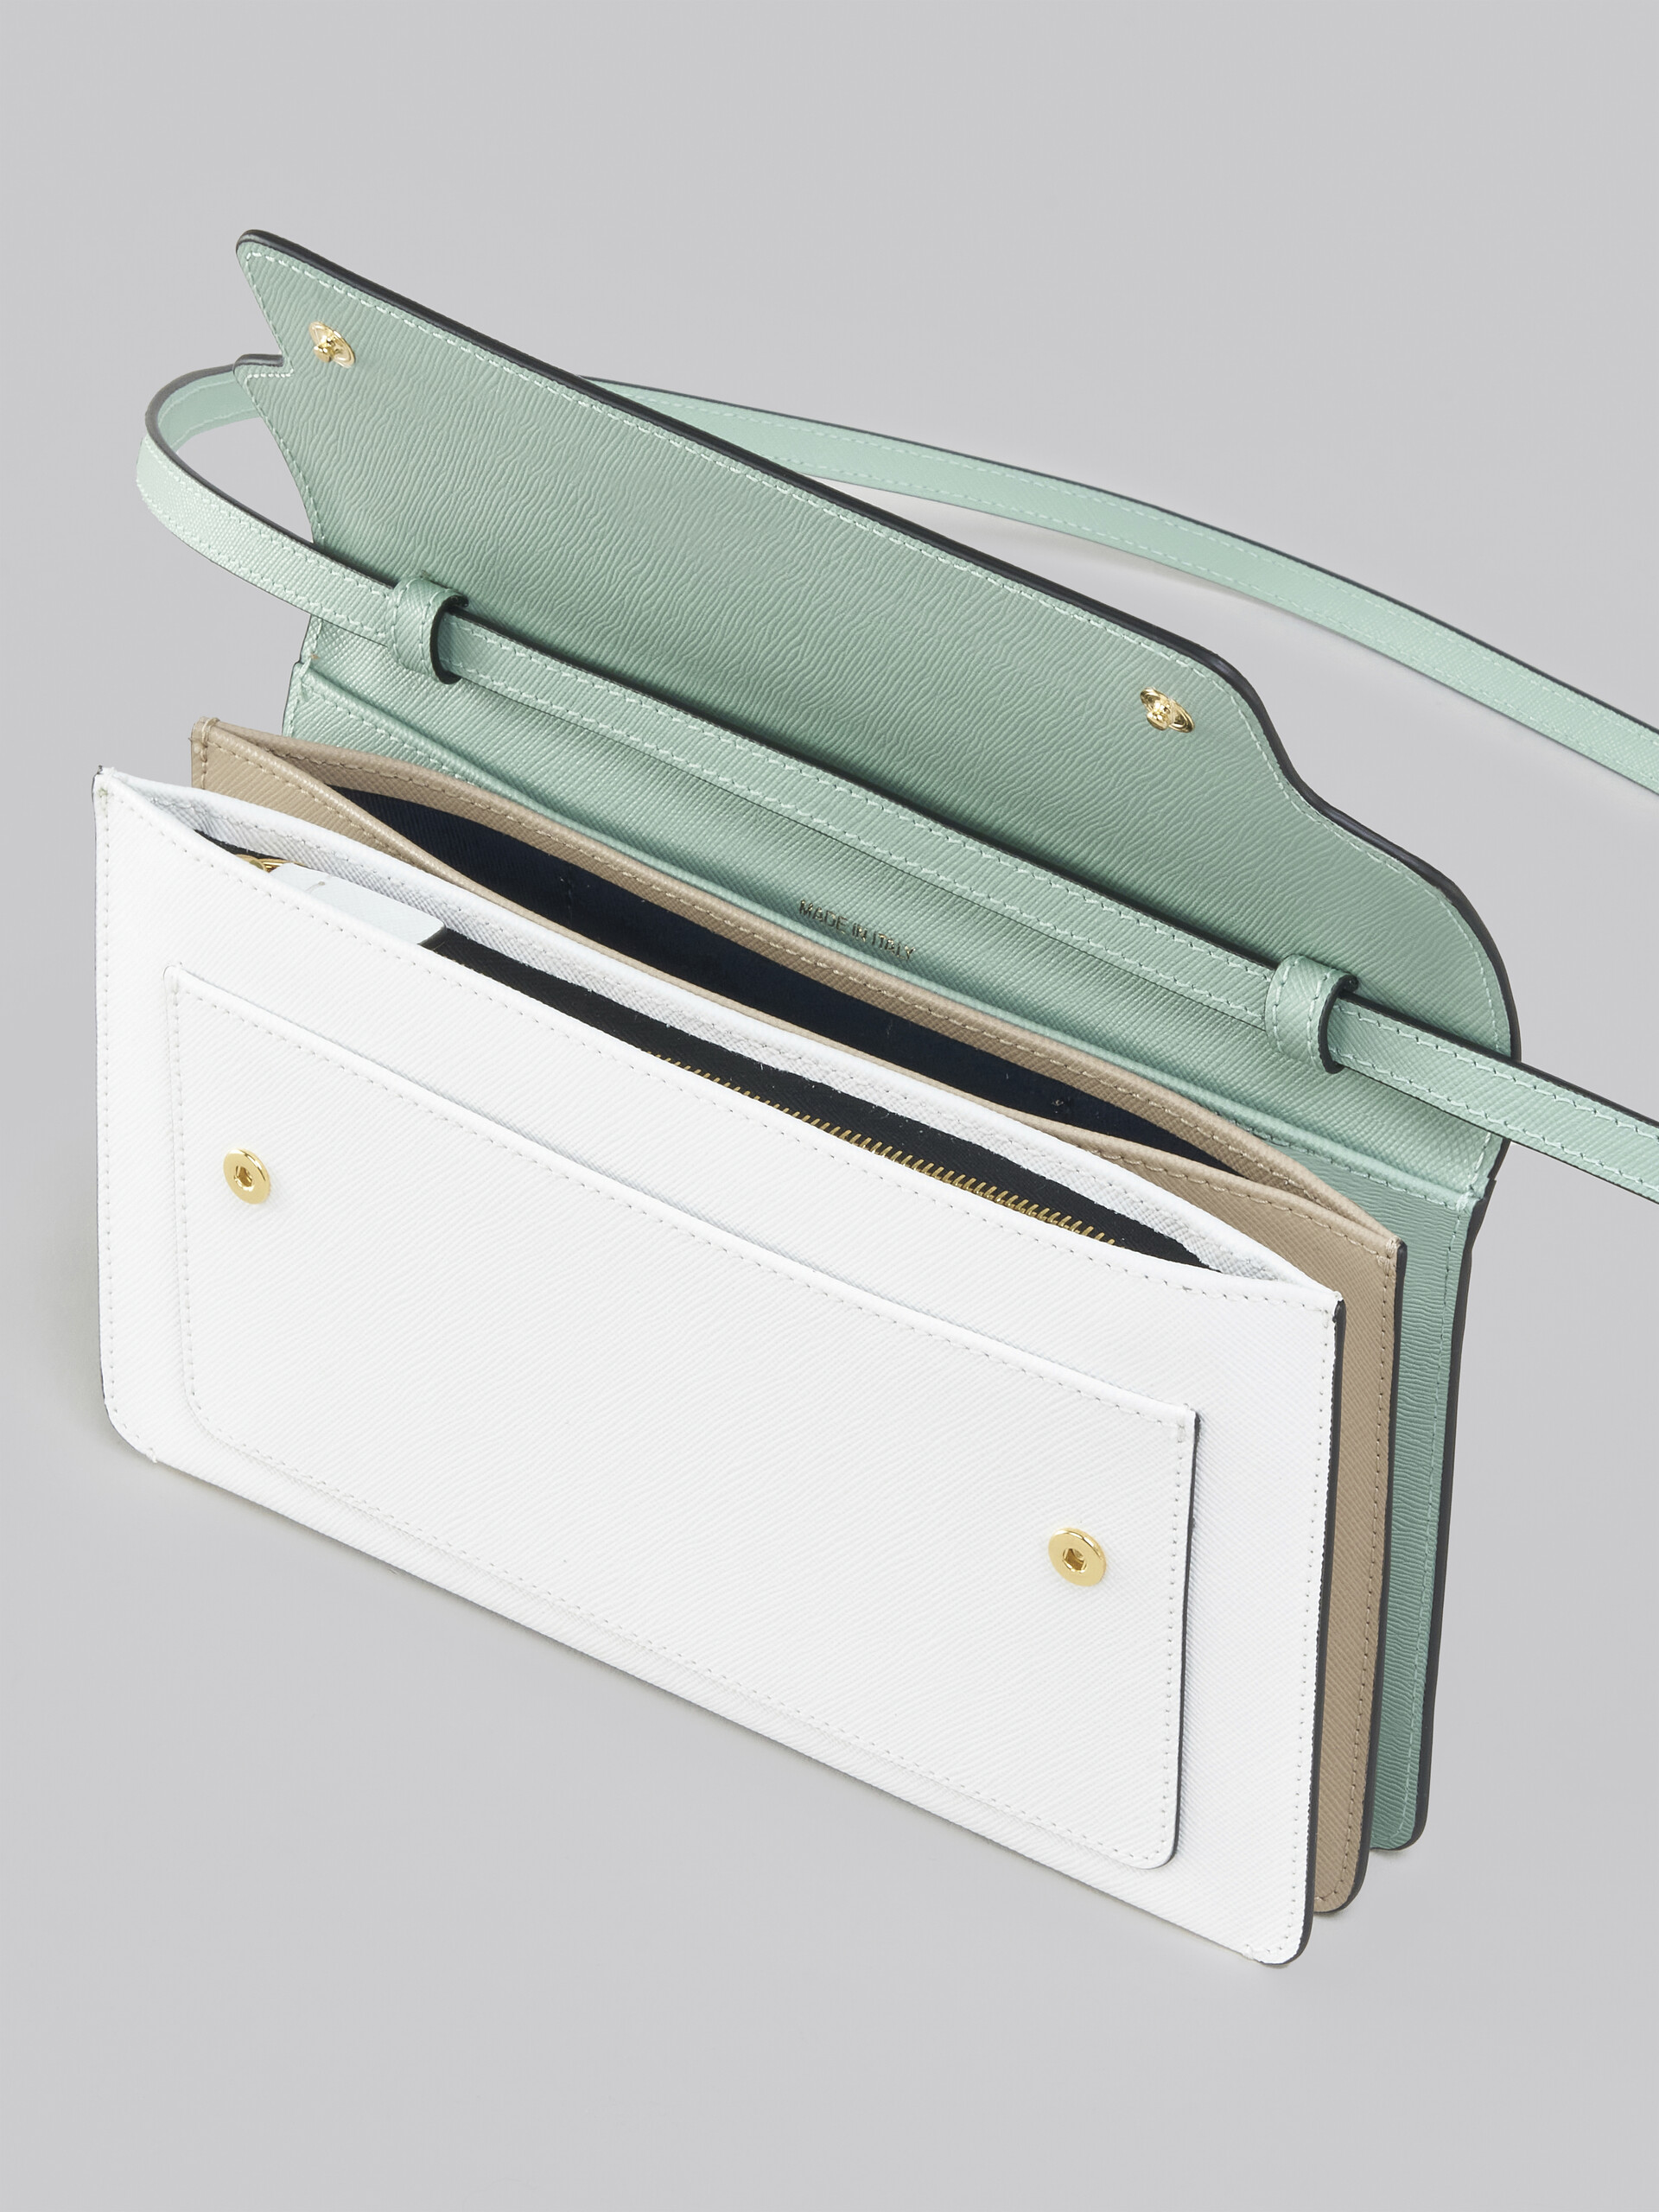 Trunk Clutch in light green white and brown saffiano leather - Pochette - Image 5